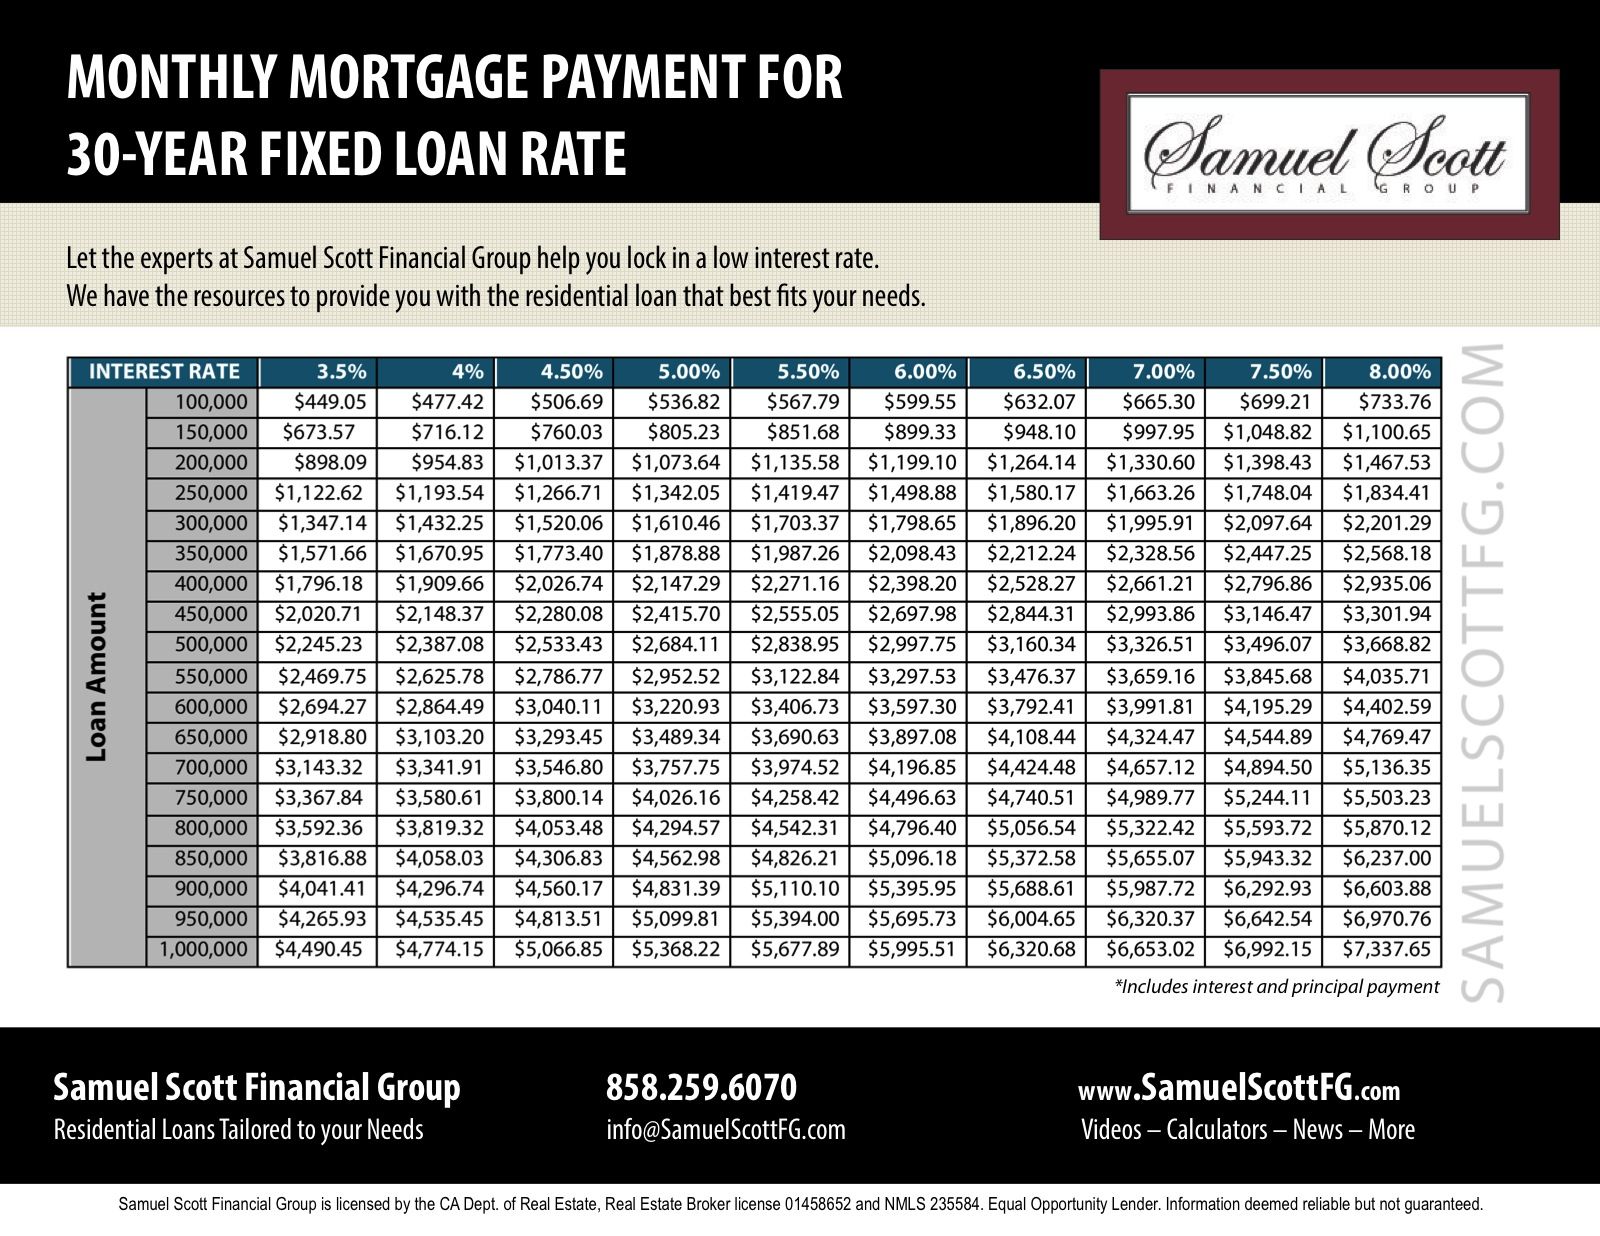 This Infographic shows the monthly mortgage payment for a 30